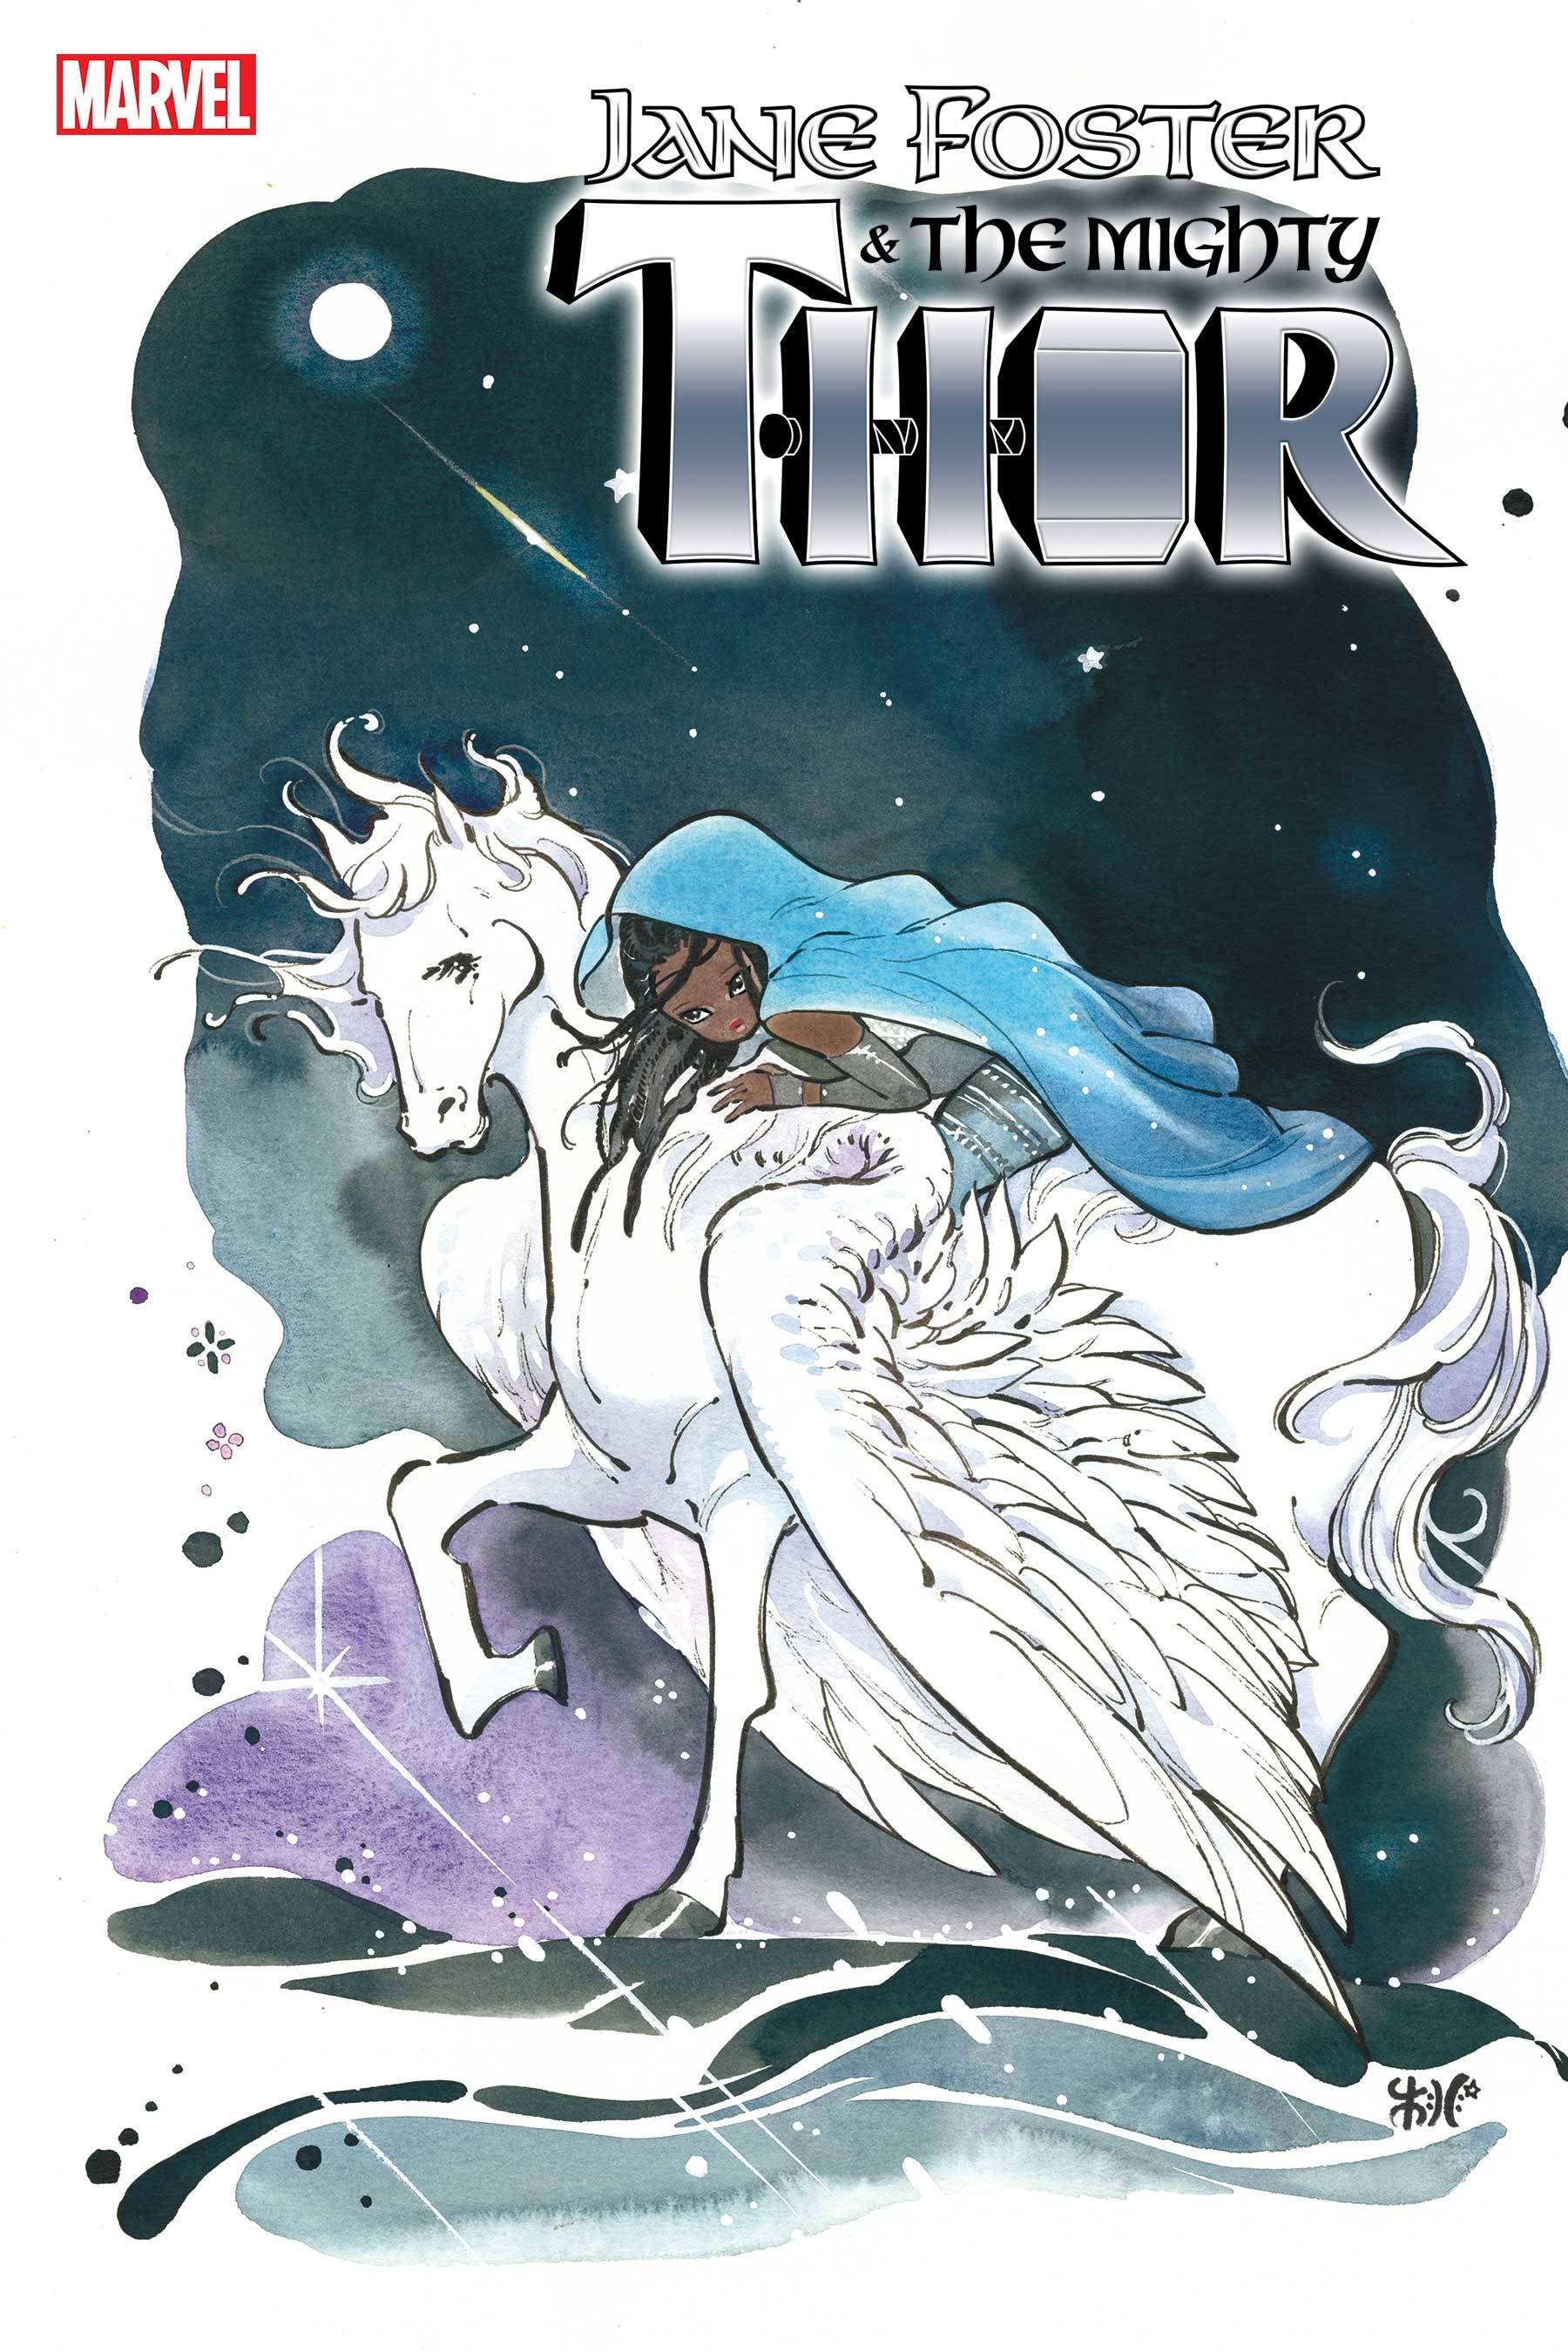 07/06/2022 JANE FOSTER MIGHTY THOR #2 (OF 5) MOMOKO VARIANT